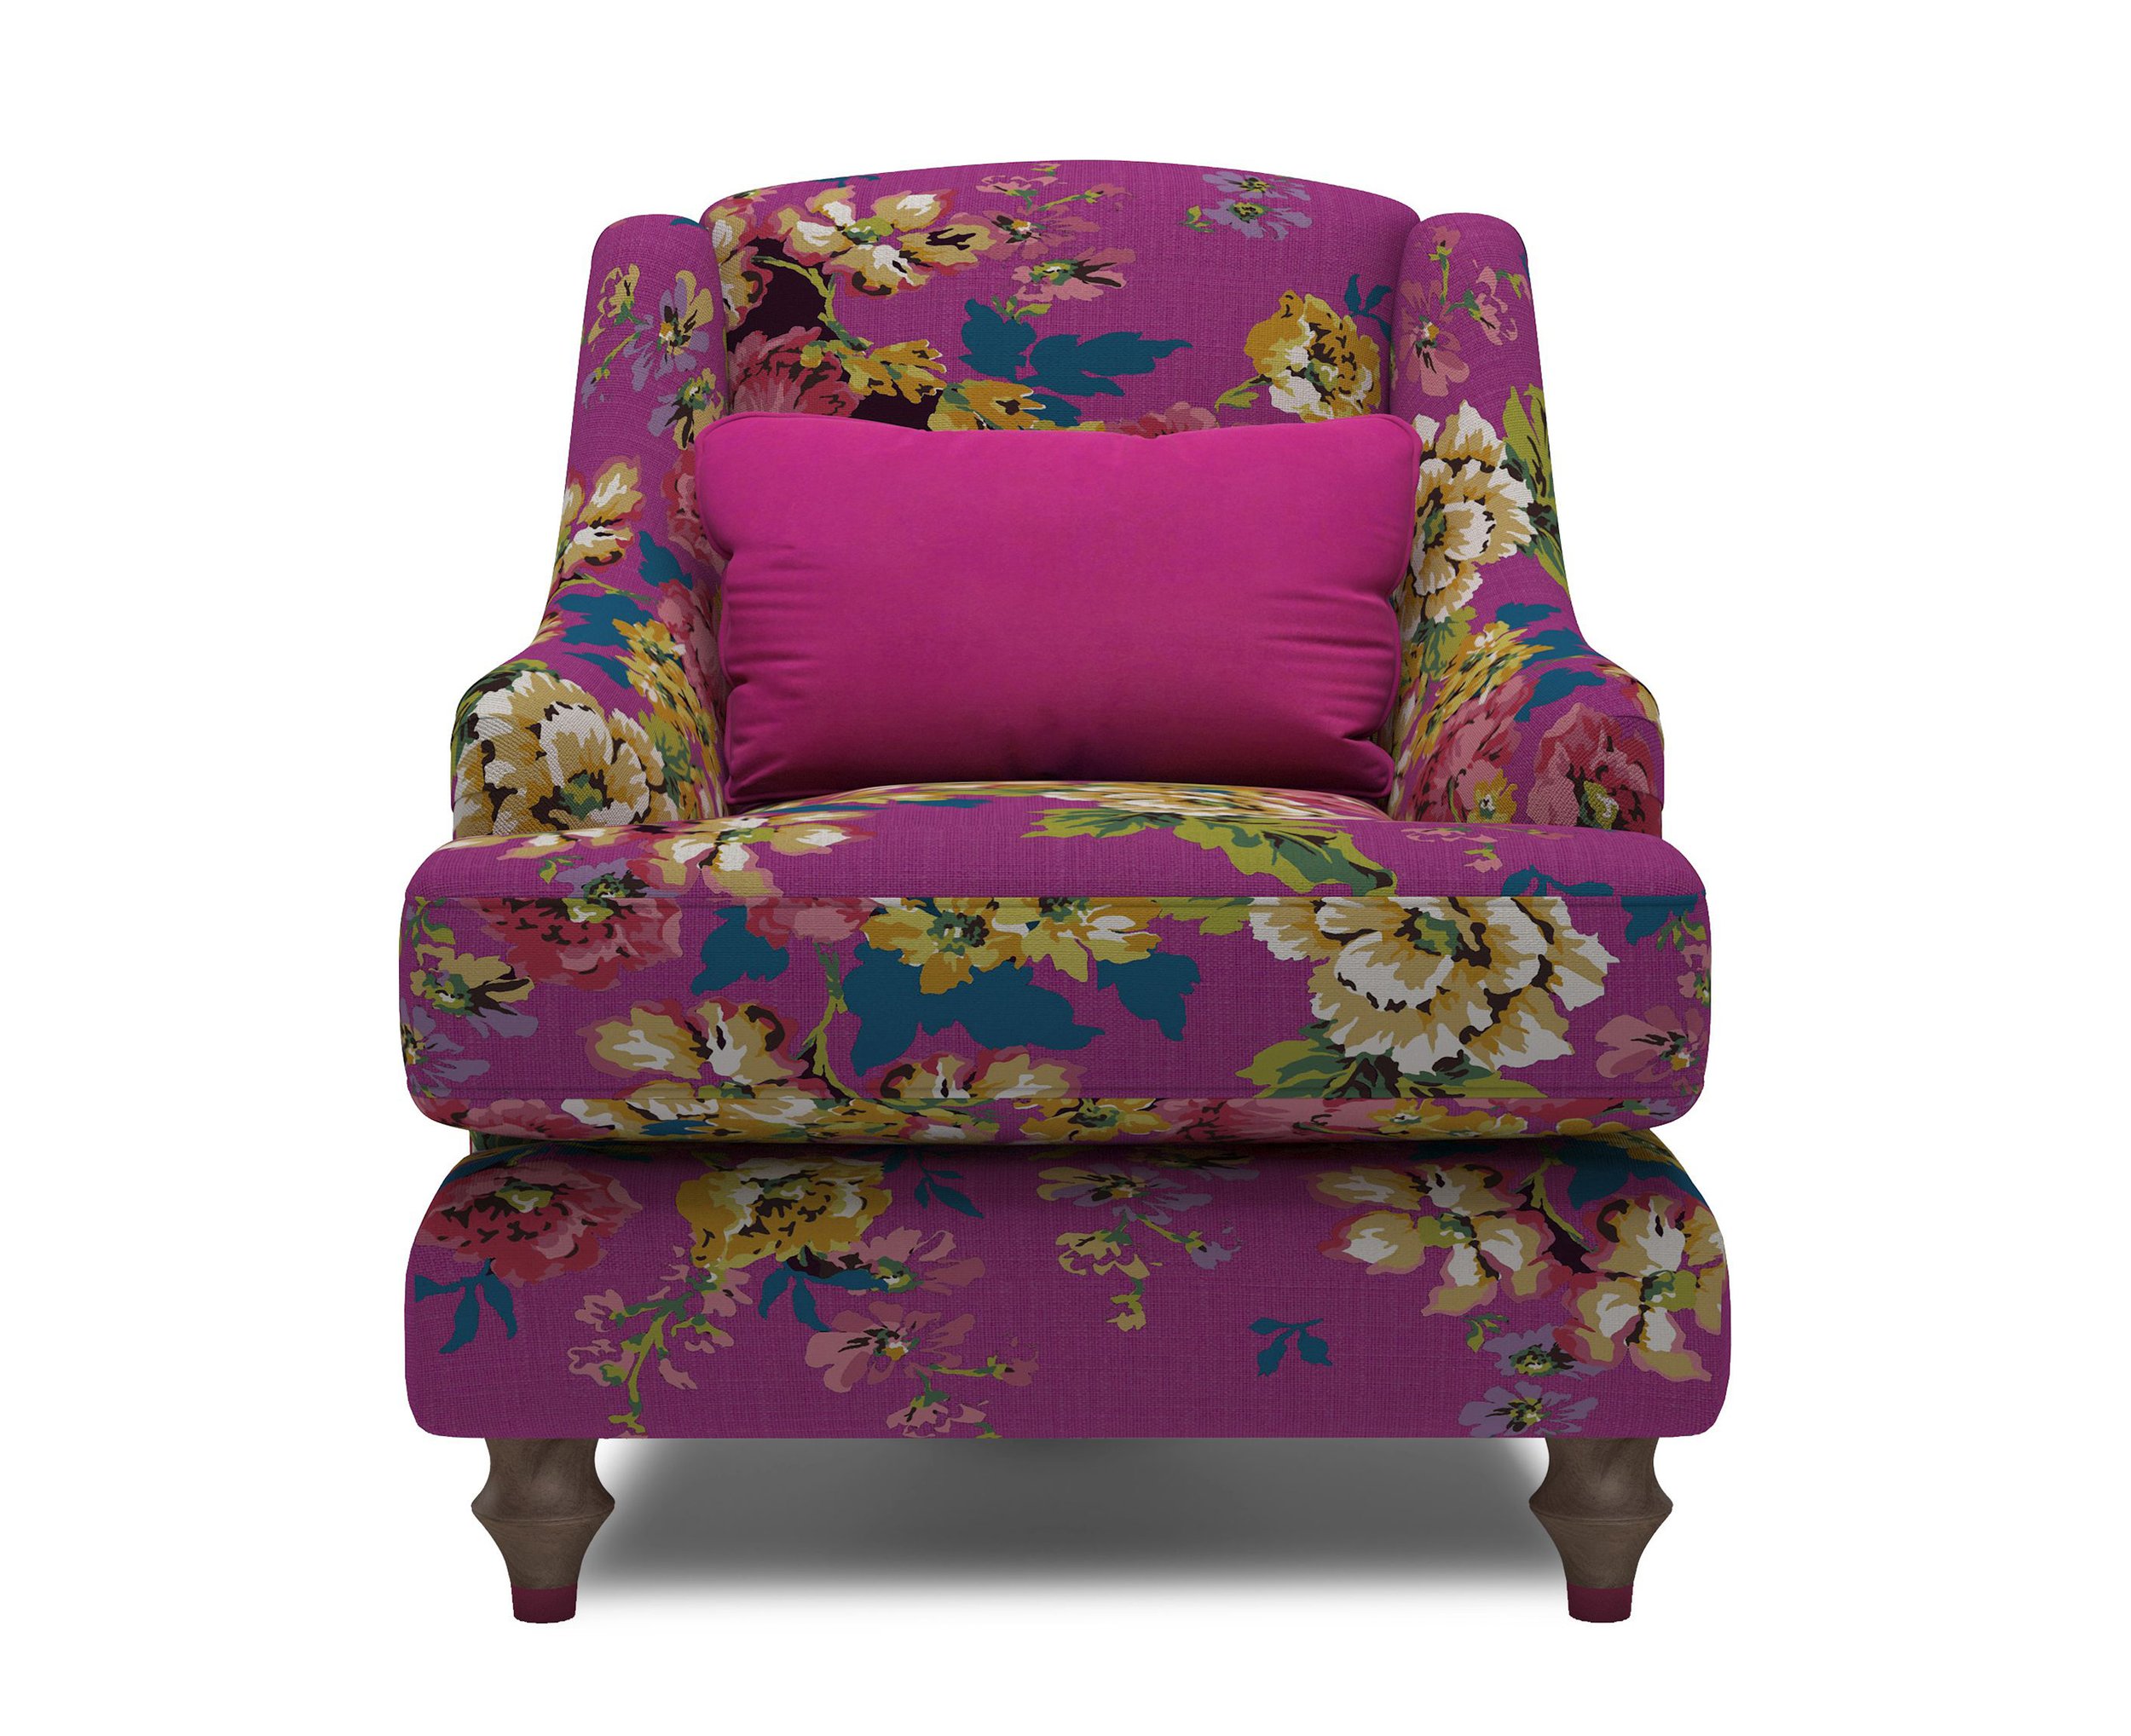 5. Joules Cambridge Cotton Accent Chair in Pink Floral All Over €818.04, 